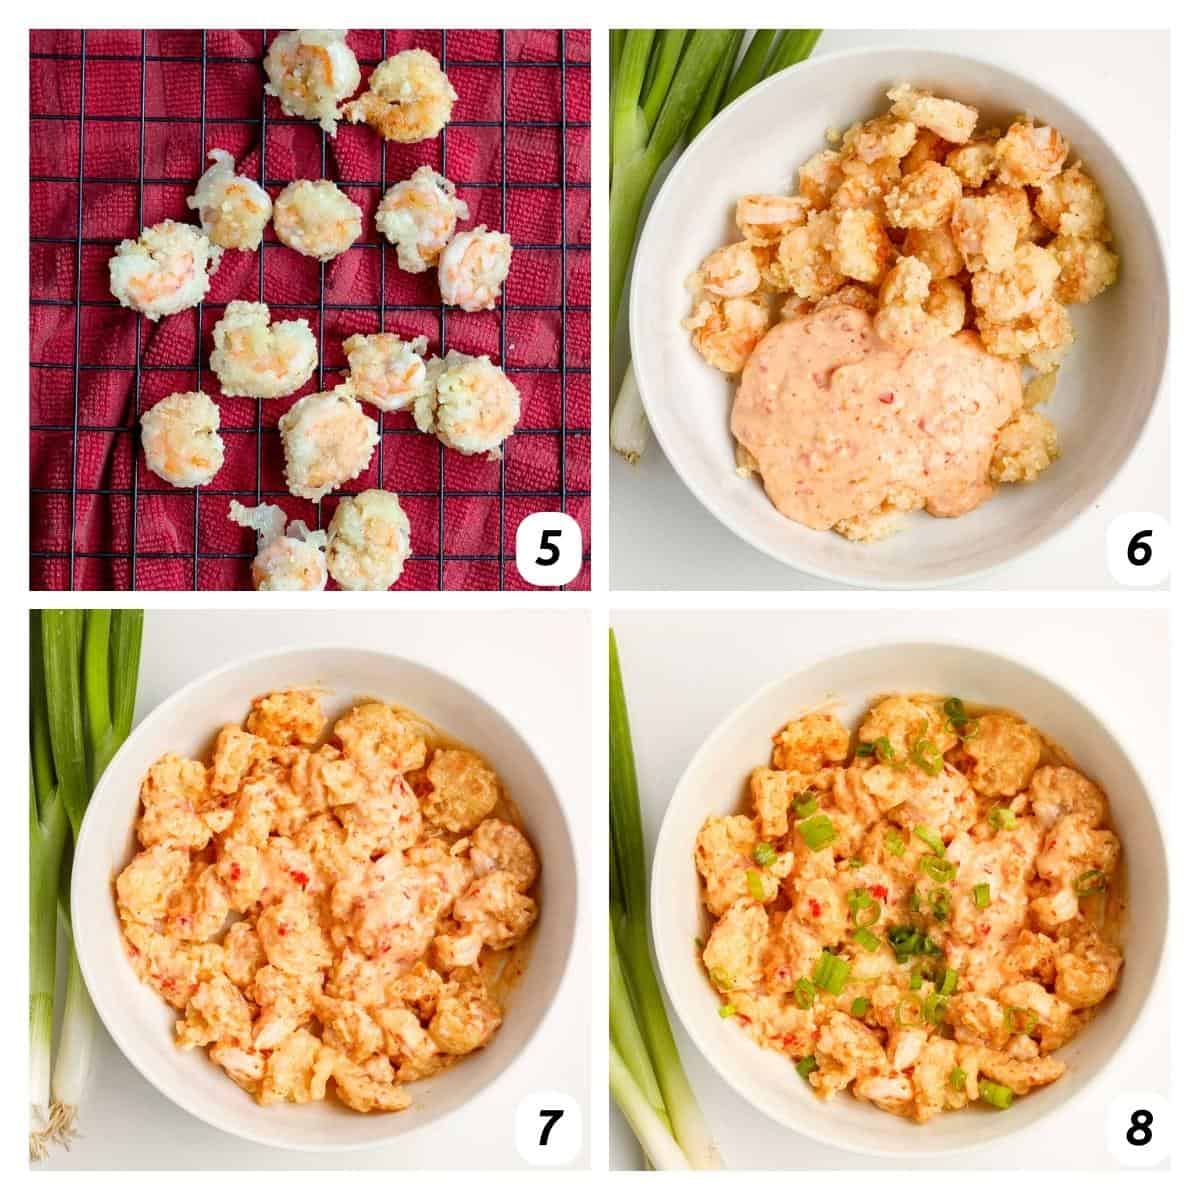 Four panel grid of process shots 5-8 - drying shrimp after frying, combining with sauce, and adding green onions.